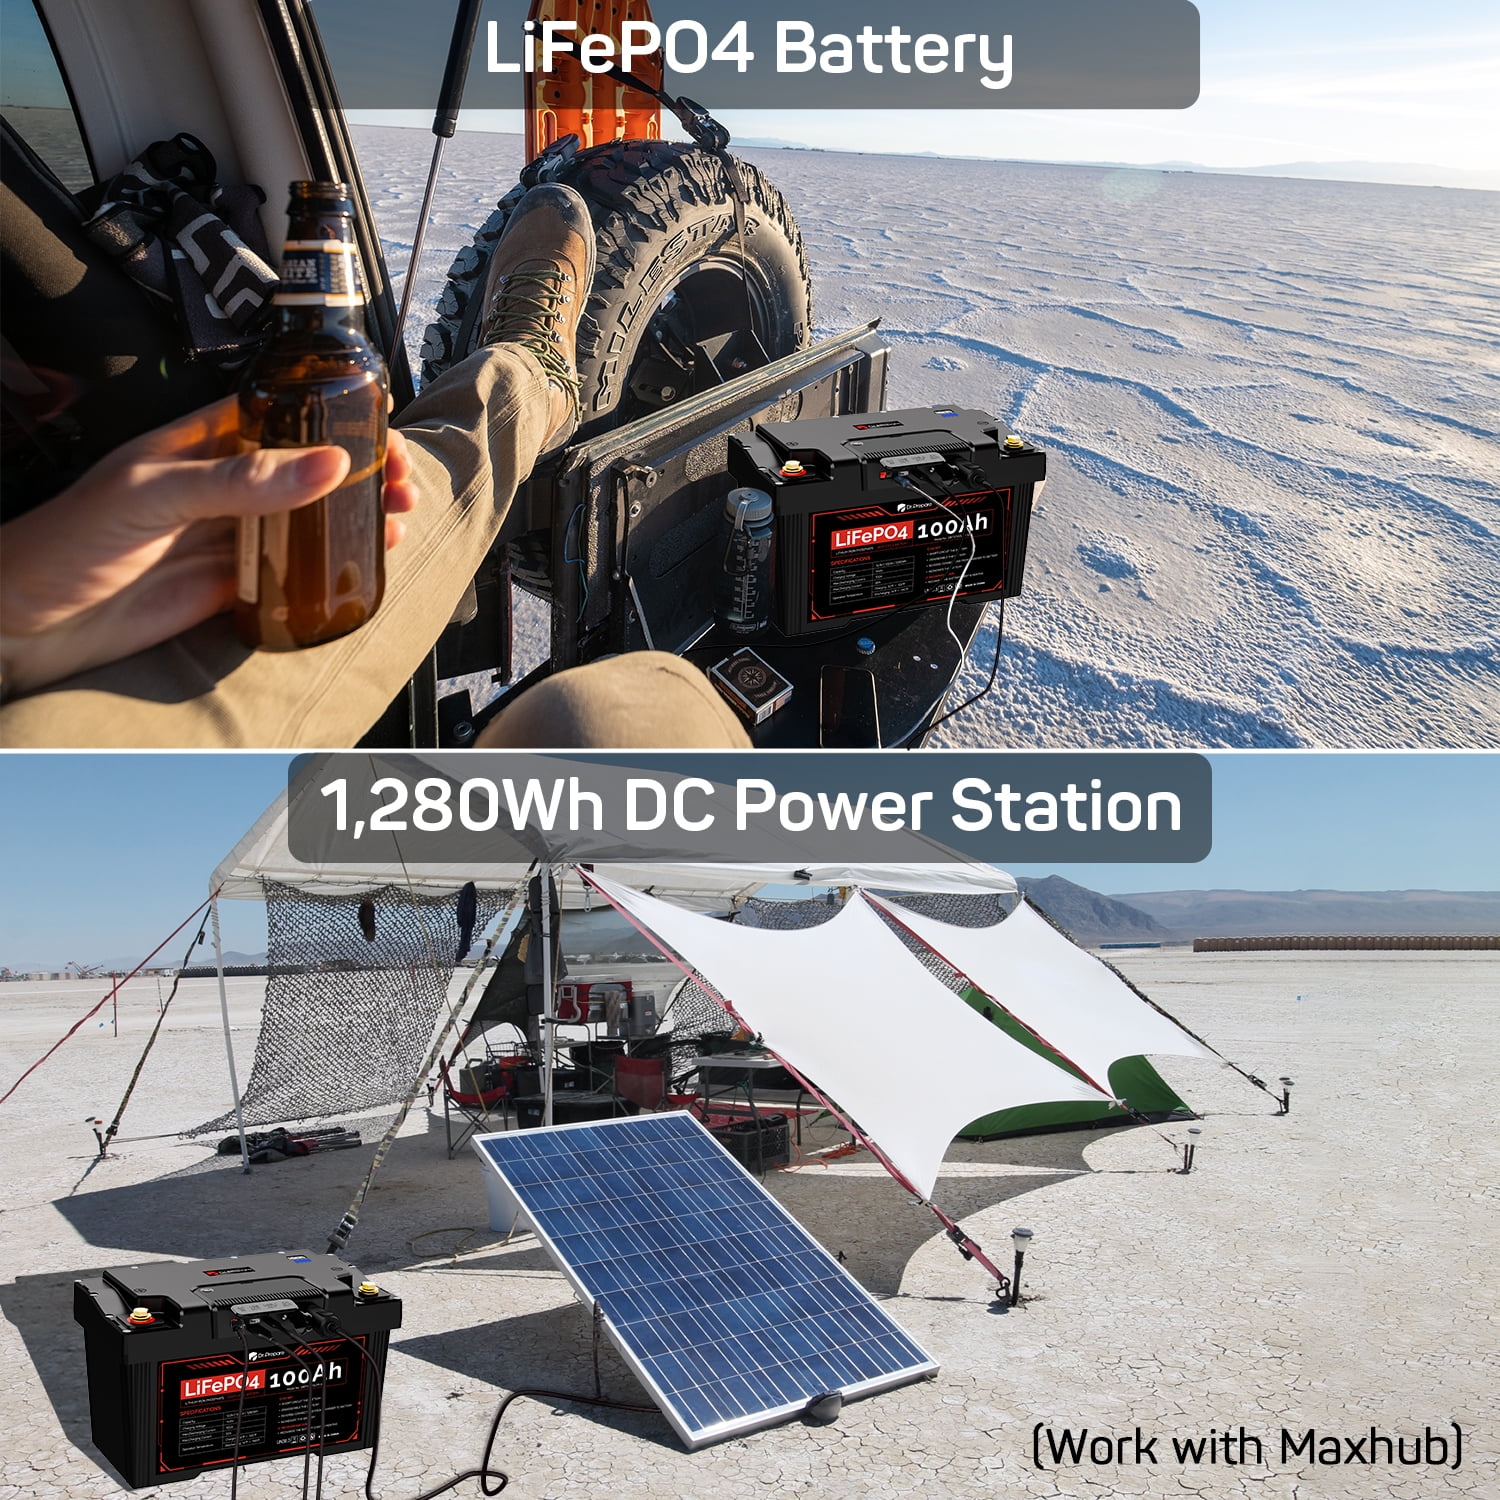 Dr. Prepare 12V 100Ah LiFePO4 Battery with Hub, 1280Wh Portable Power  Station Solar Powered Generator, Battery Backup Power Supply for Home,  CPAP, Outdoor RV, Off Grid Applications, POWERMAX 